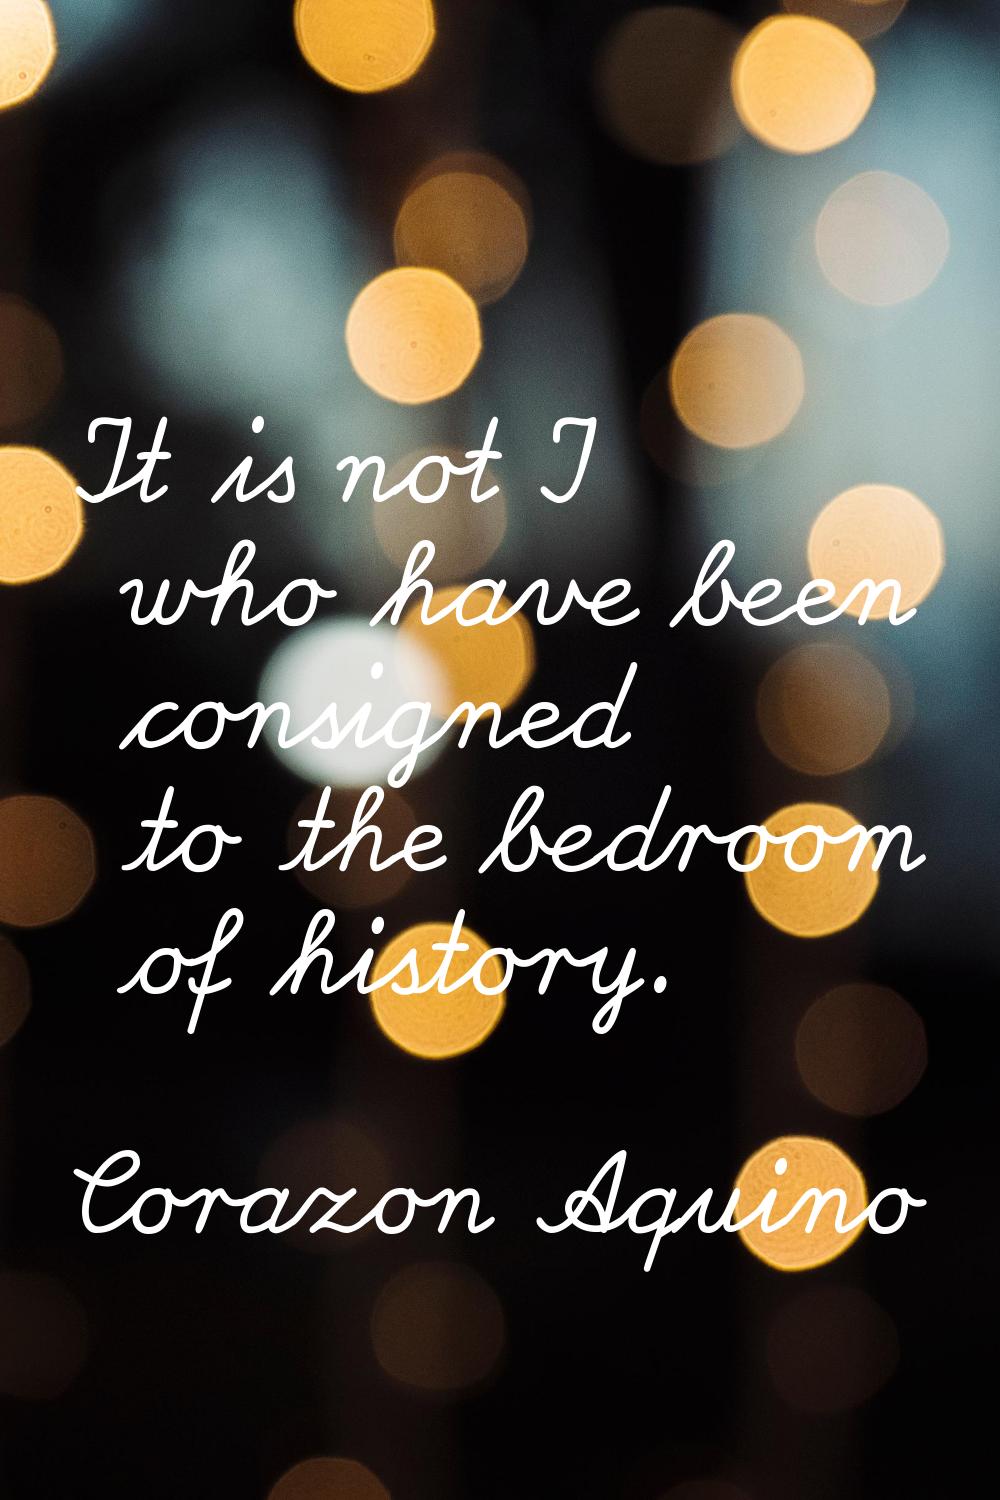 It is not I who have been consigned to the bedroom of history.